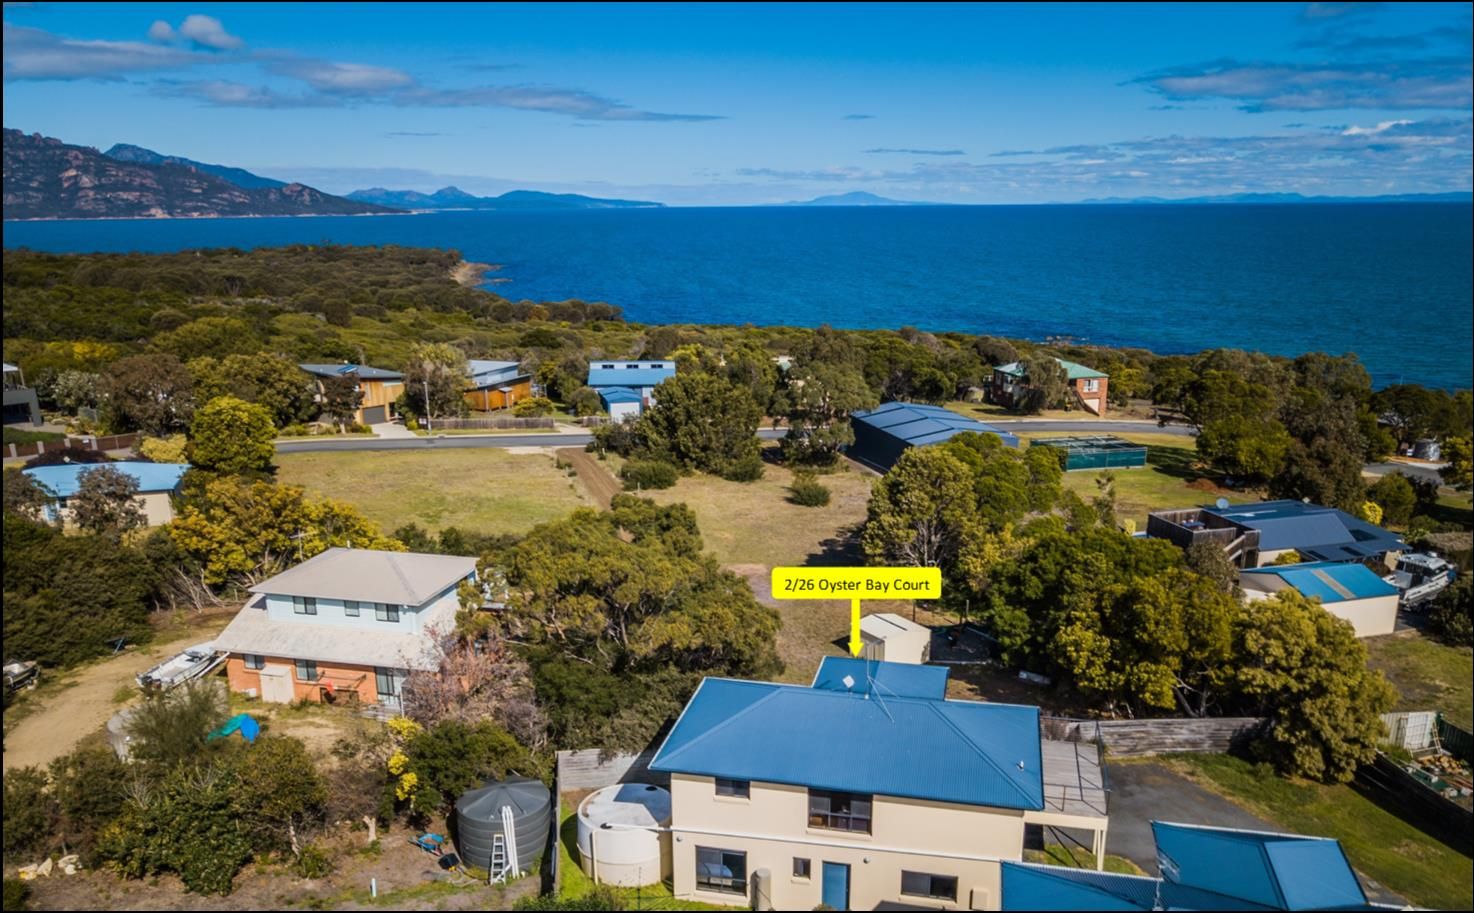 2/26 Oyster Bay Court Coles Bay Property History Address Research